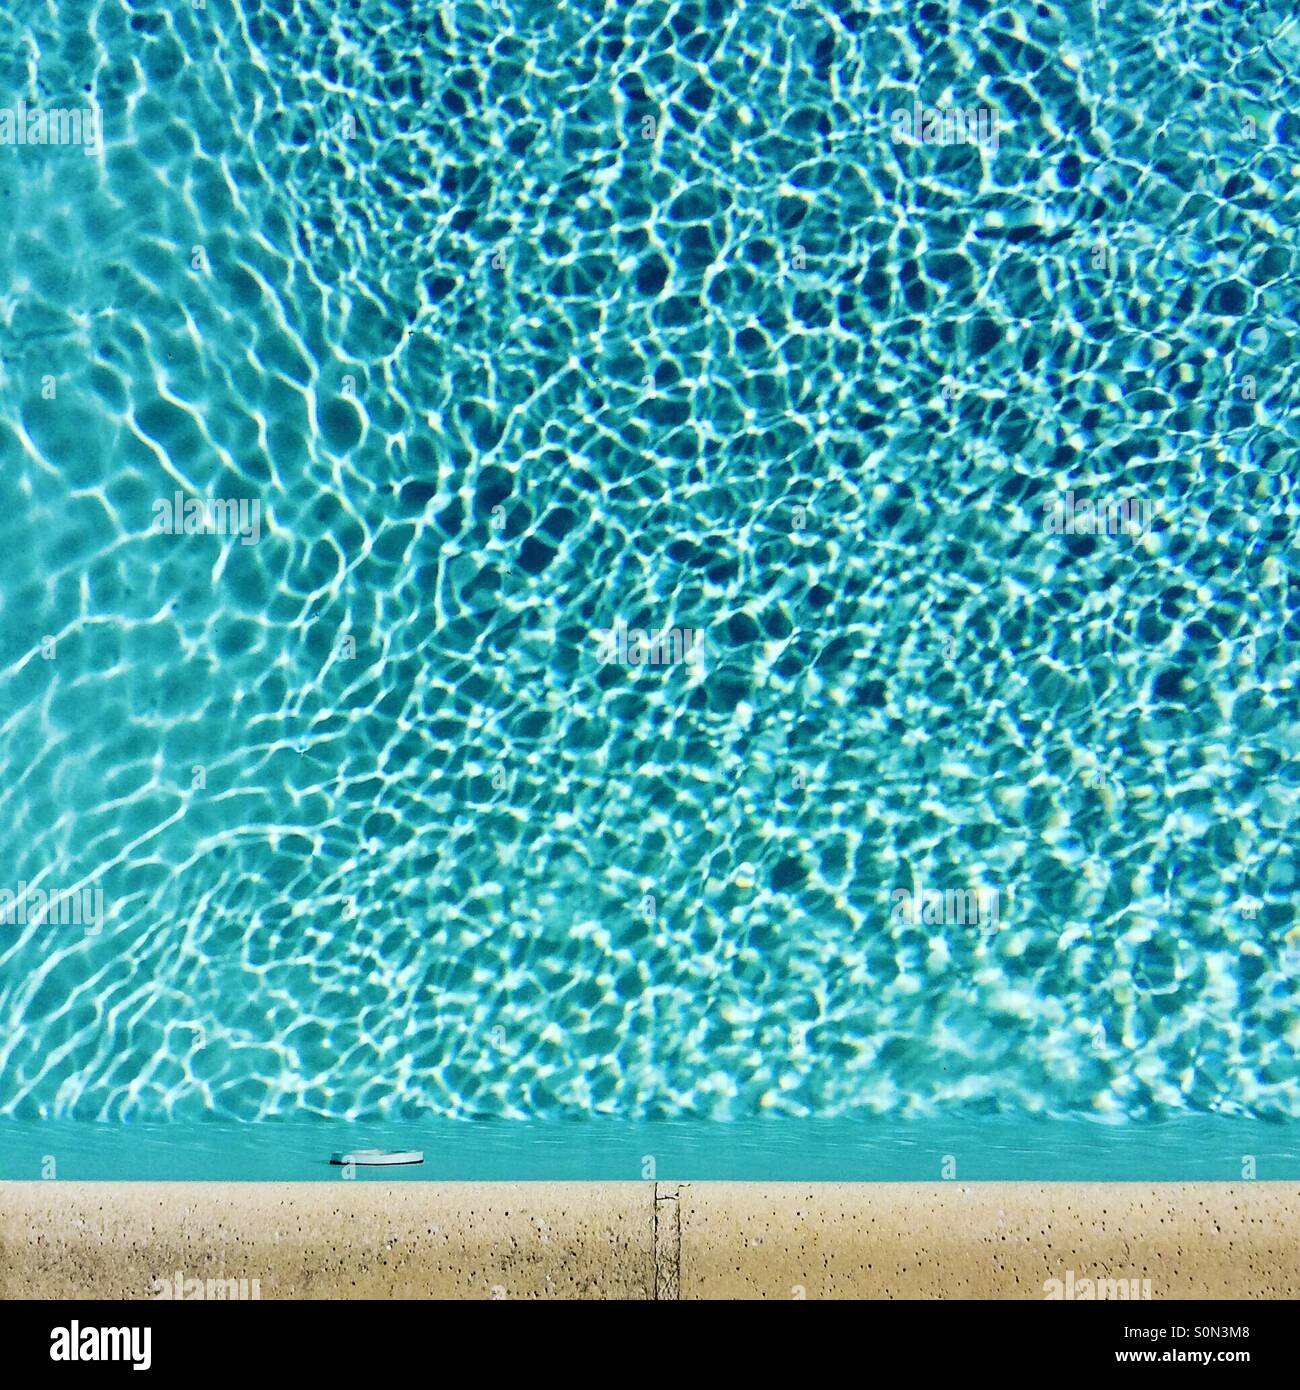 Standing on the side of a swimming pool looking down at the ripples in sunlight Stock Photo